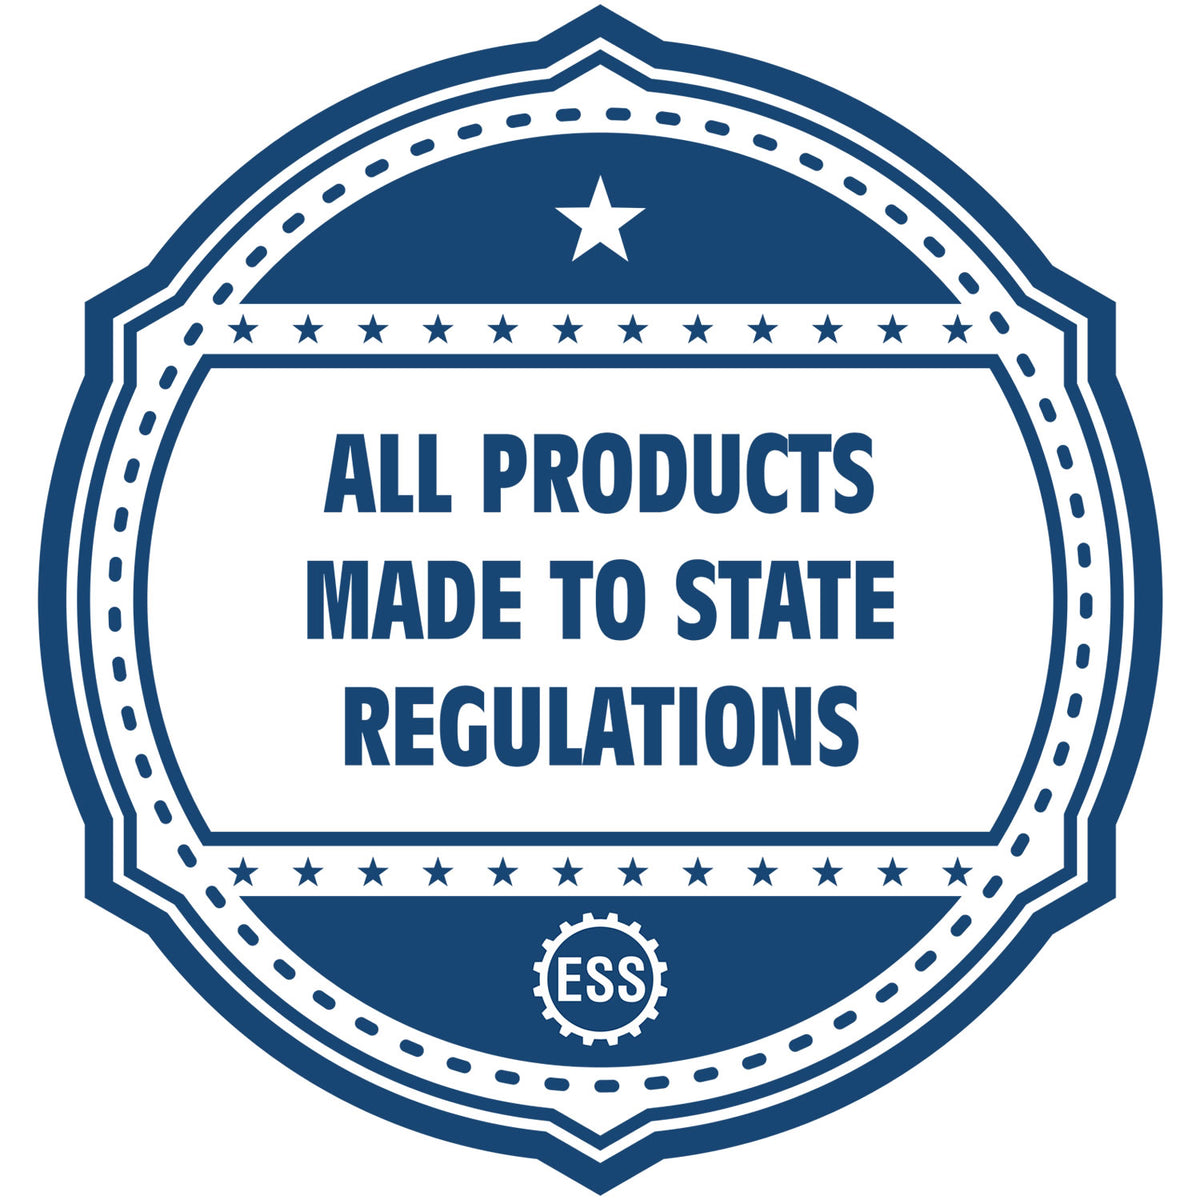 An icon or badge element for the State of Maine Soft Land Surveyor Embossing Seal showing that this product is made in compliance with state regulations.